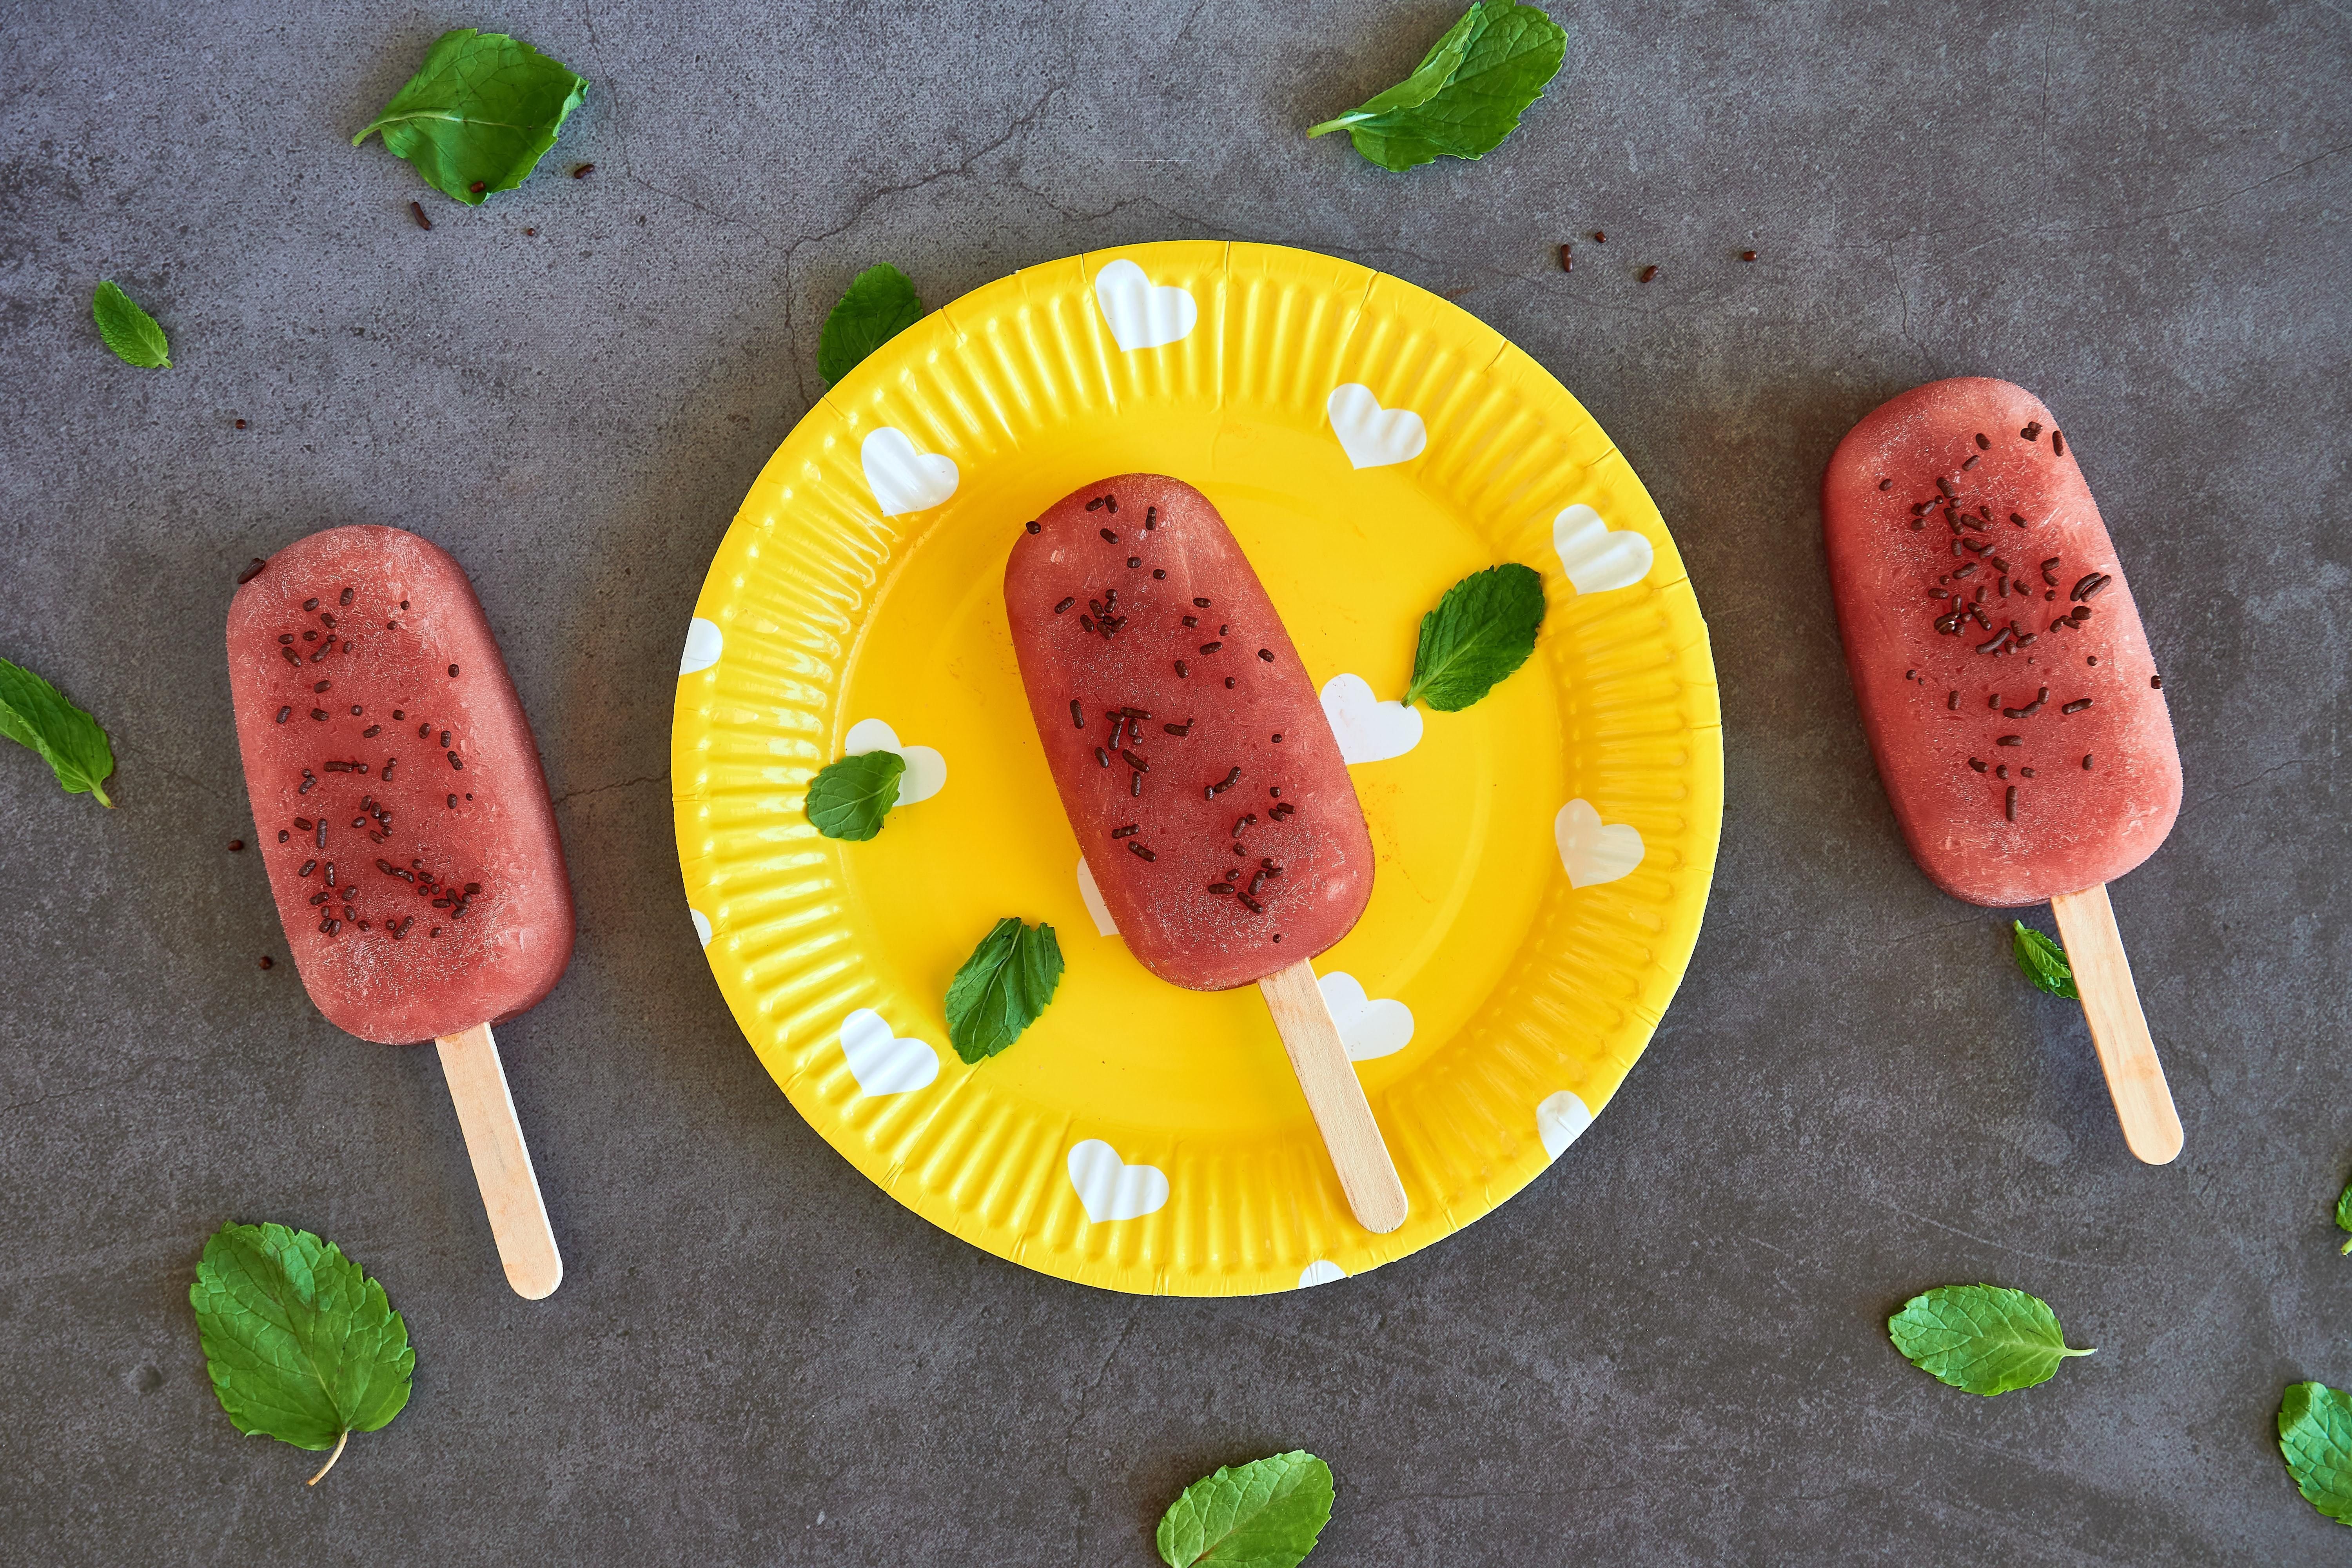 Popsicles aren't just a nice treat. They can help you stay hydrated, too!